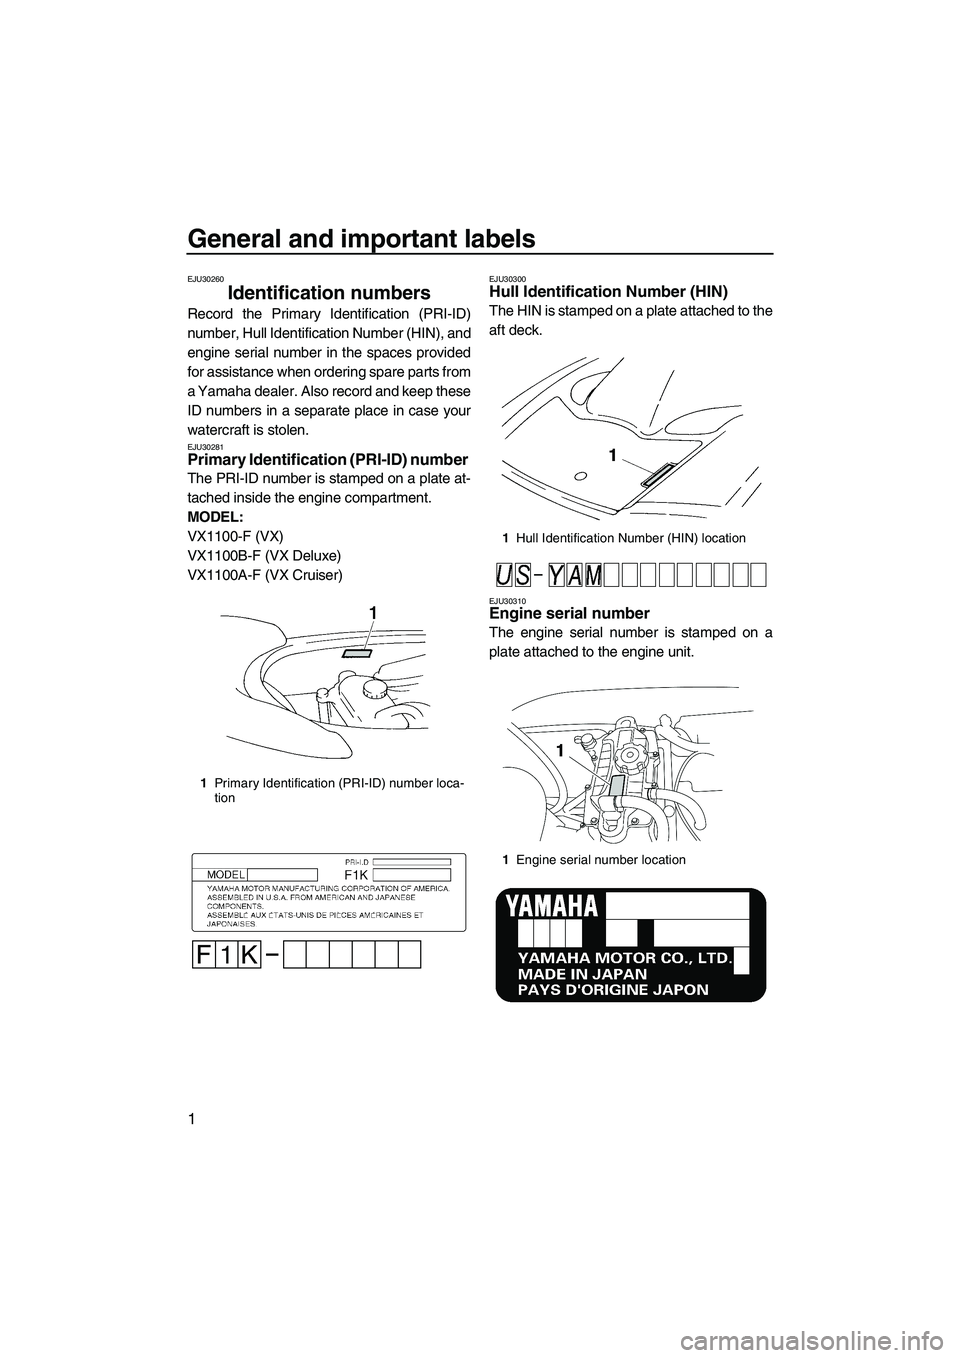 YAMAHA VX SPORT 2007  Owners Manual General and important labels
1
EJU30260
Identification numbers 
Record the Primary Identification (PRI-ID)
number, Hull Identification Number (HIN), and
engine serial number in the spaces provided
for